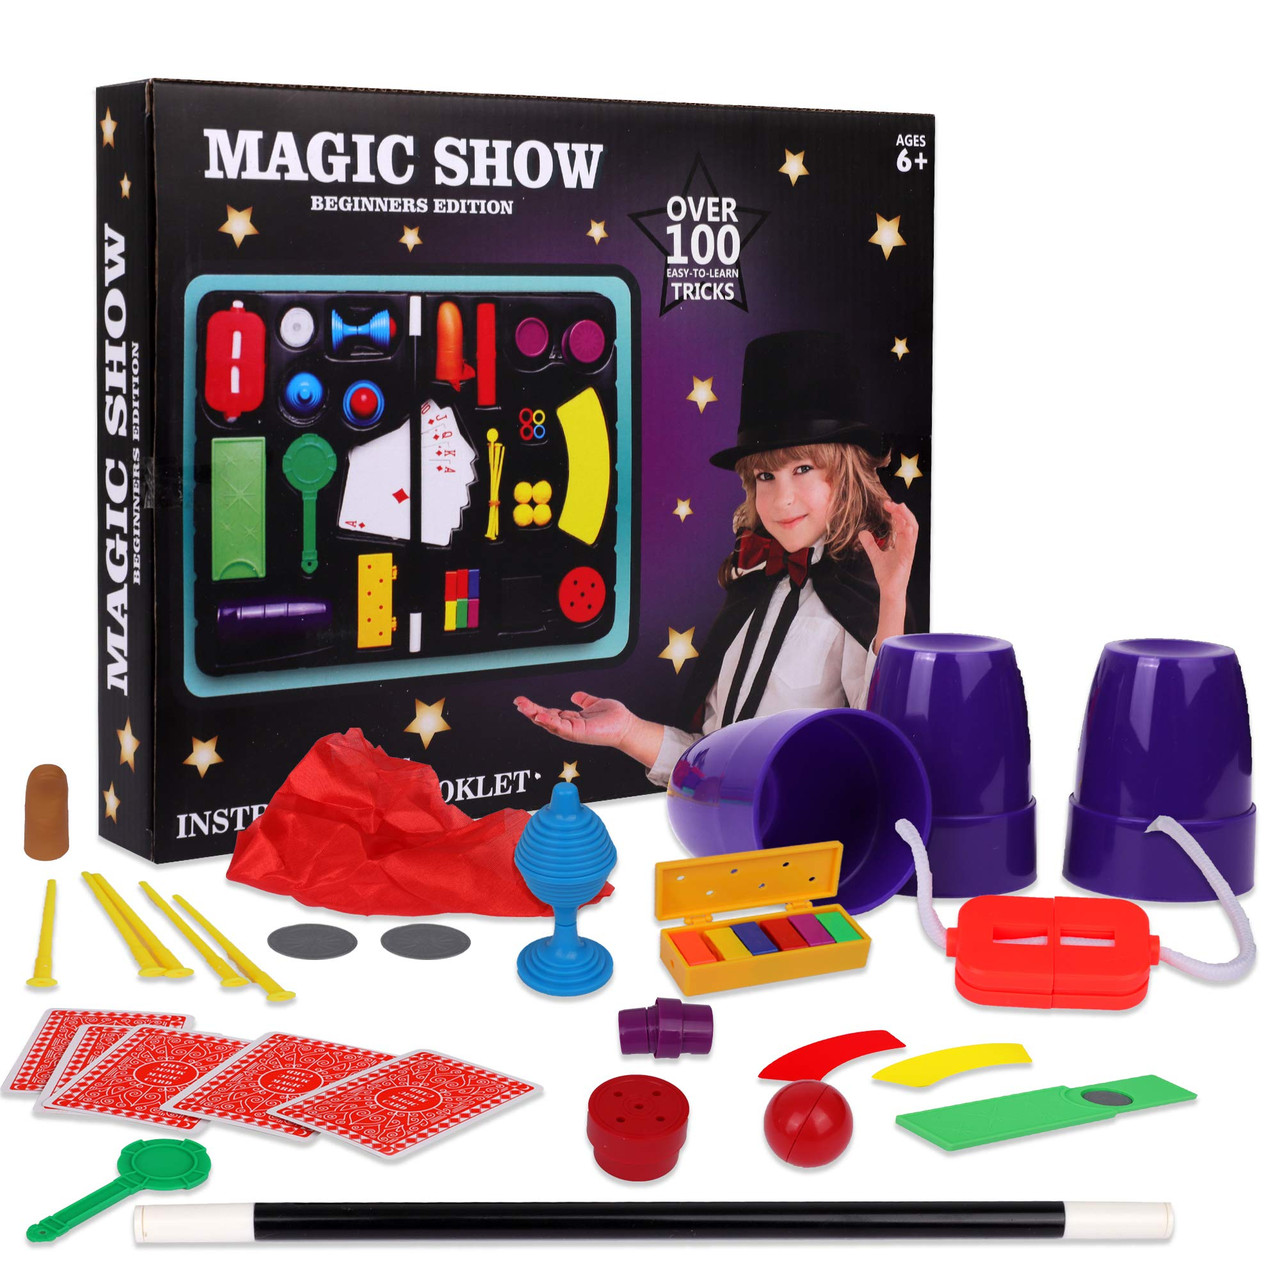 Playkidz Magic Trick for Kids Set 3 - Magic Set with Over 35 Tricks Made  Simple, Magician Pretend Play Set with Wand & More Magic Tricks - Easy to